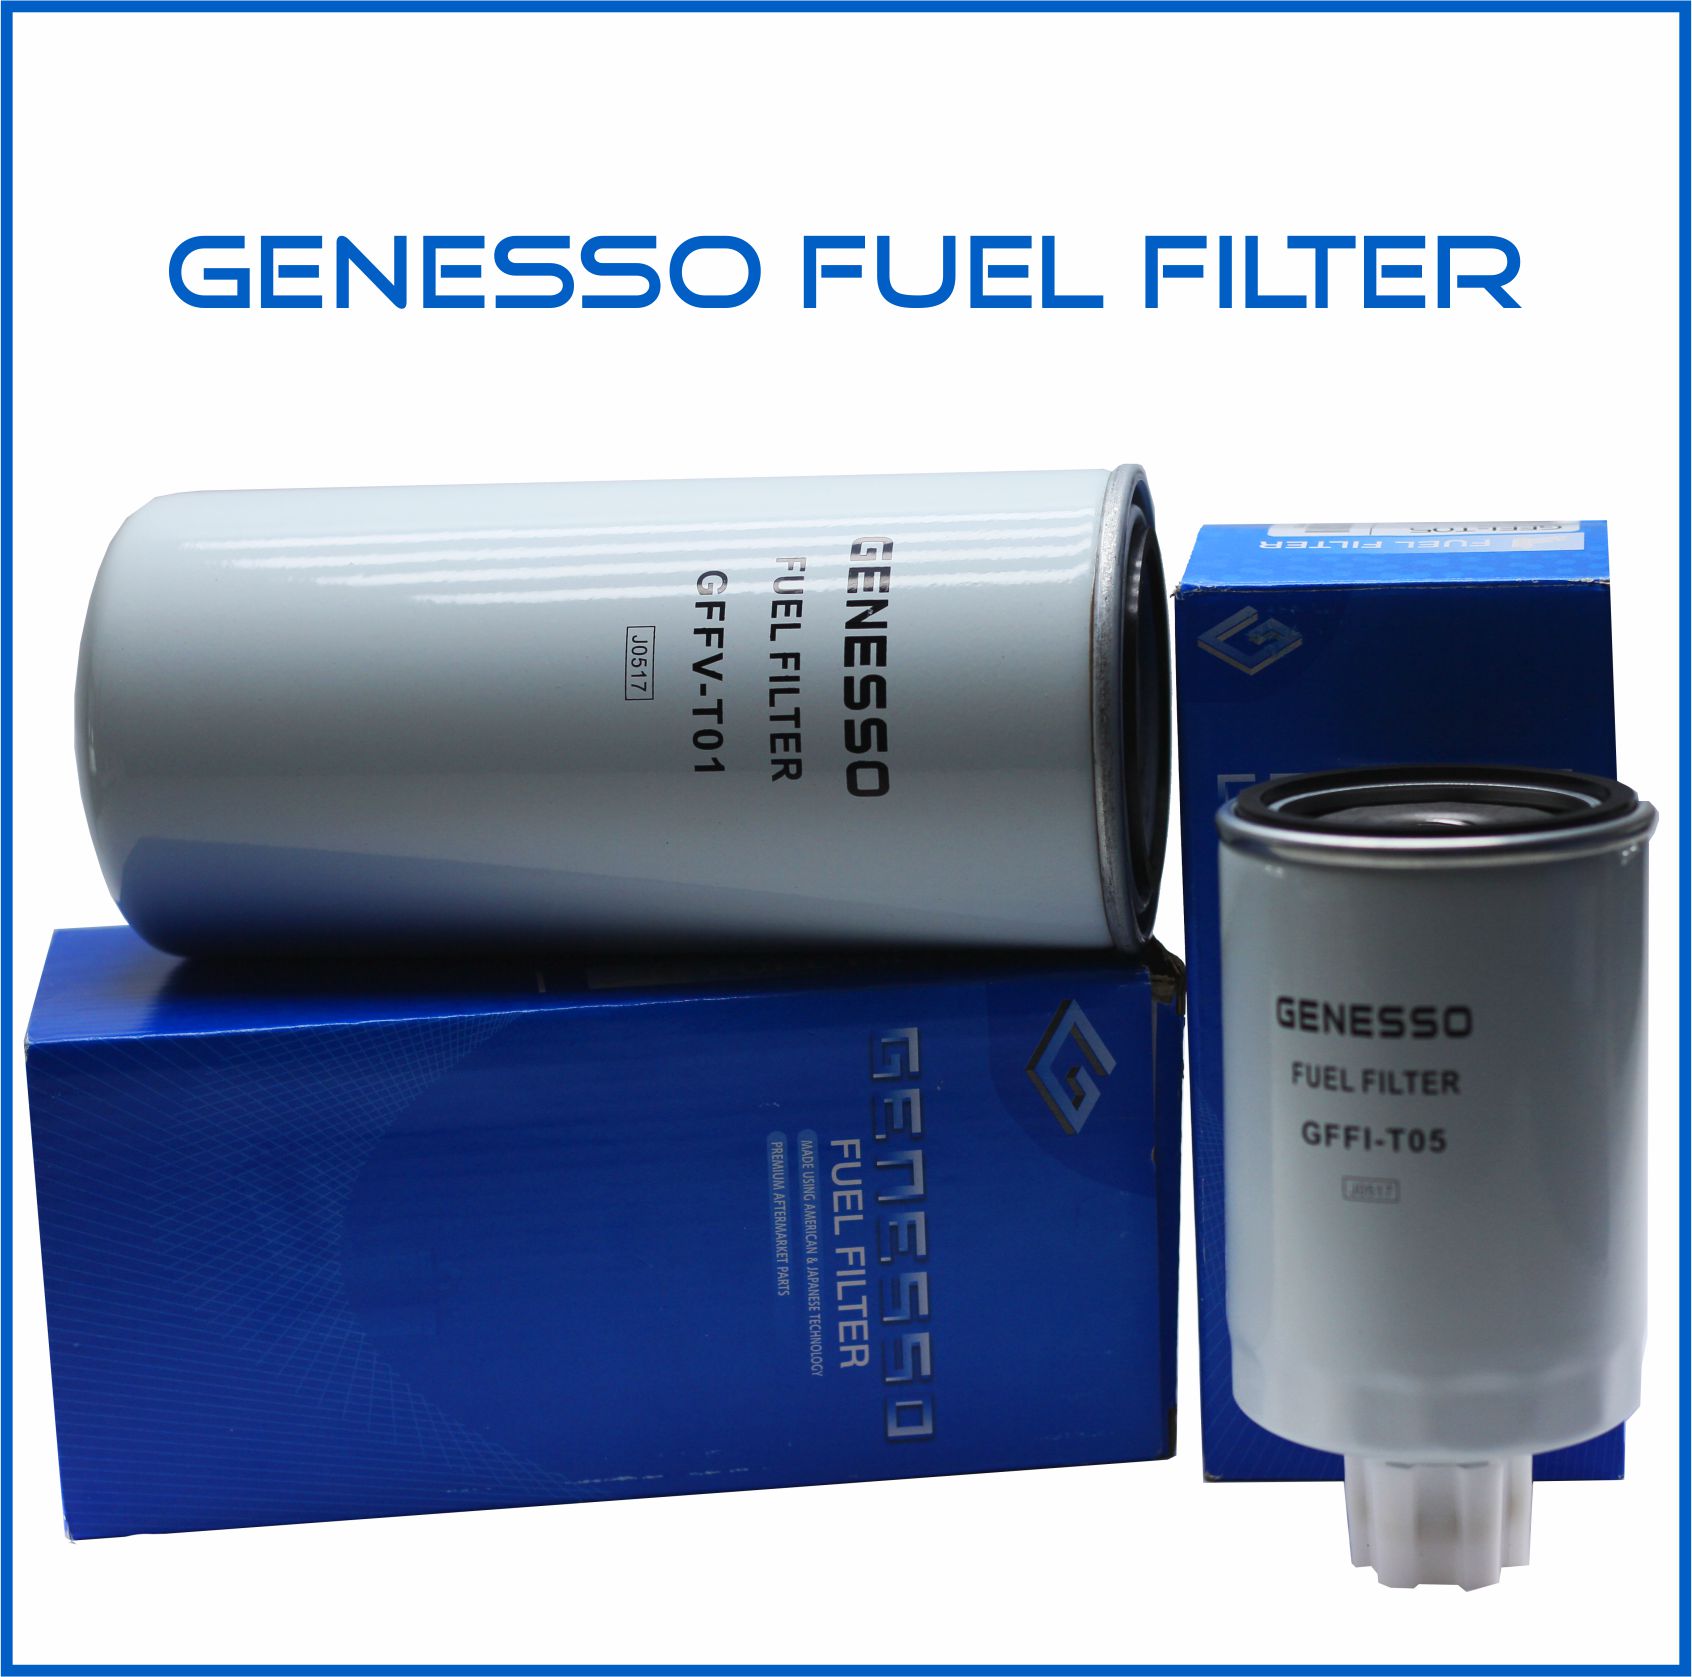 Genesso Fuel Filters